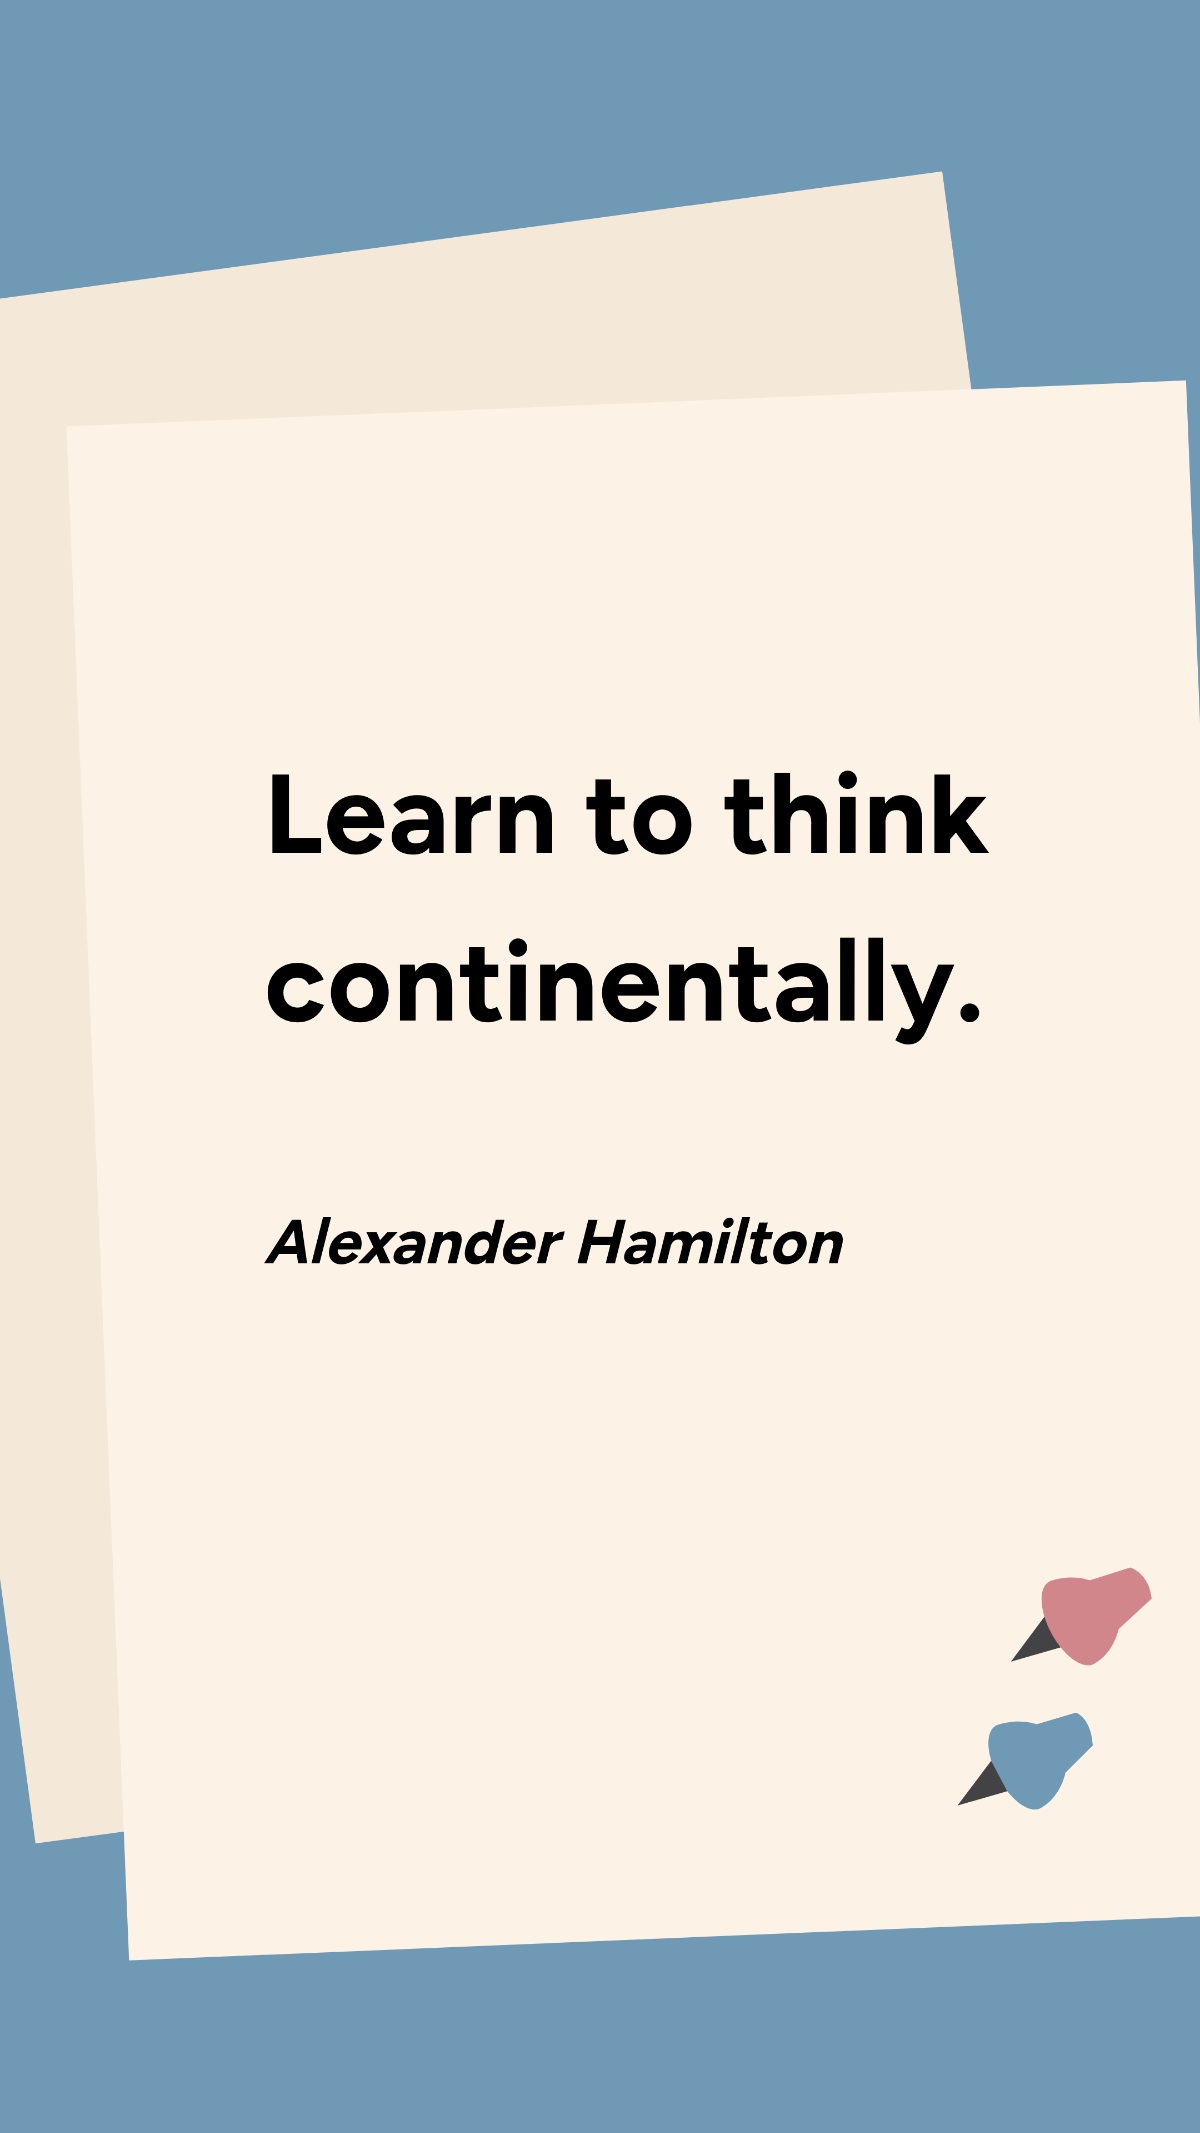 Free Alexander Hamilton - Learn to think continentally. Template